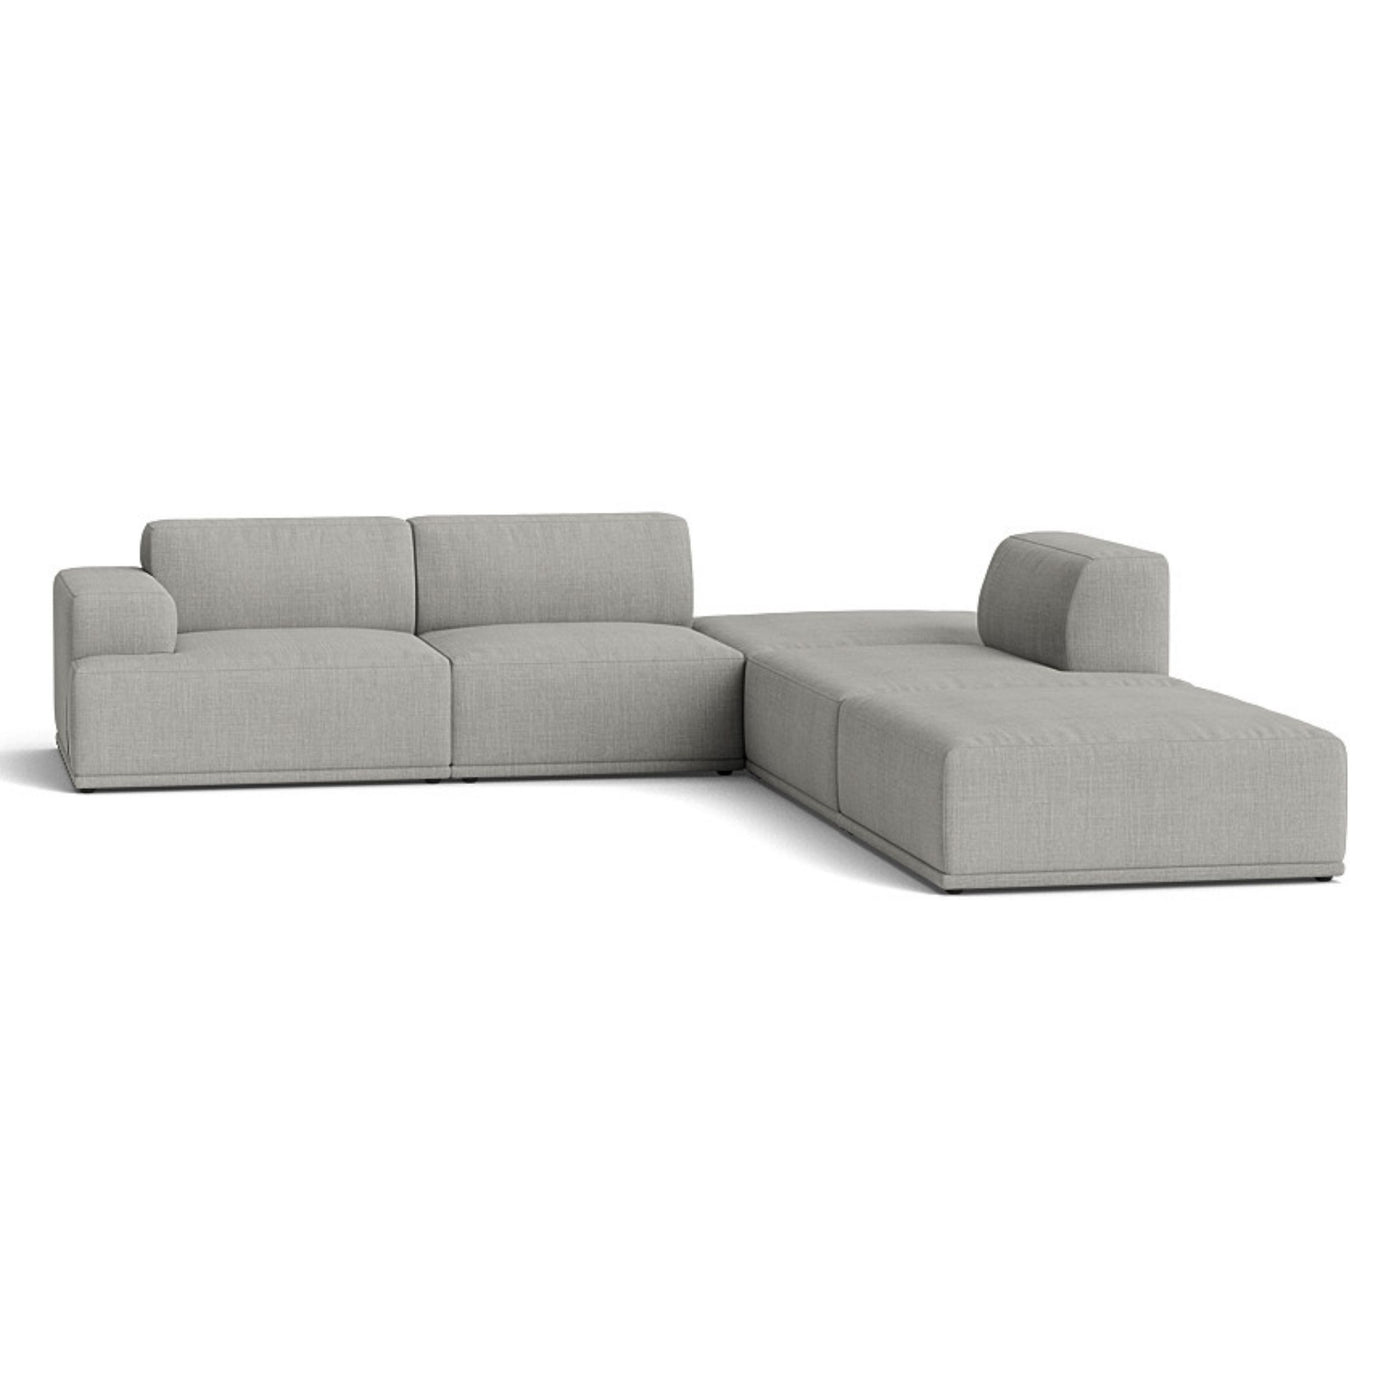 Muuto Connect Soft Modular Corner Sofa, configuration 3. made-to-order from someday designs. #colour_remix-133